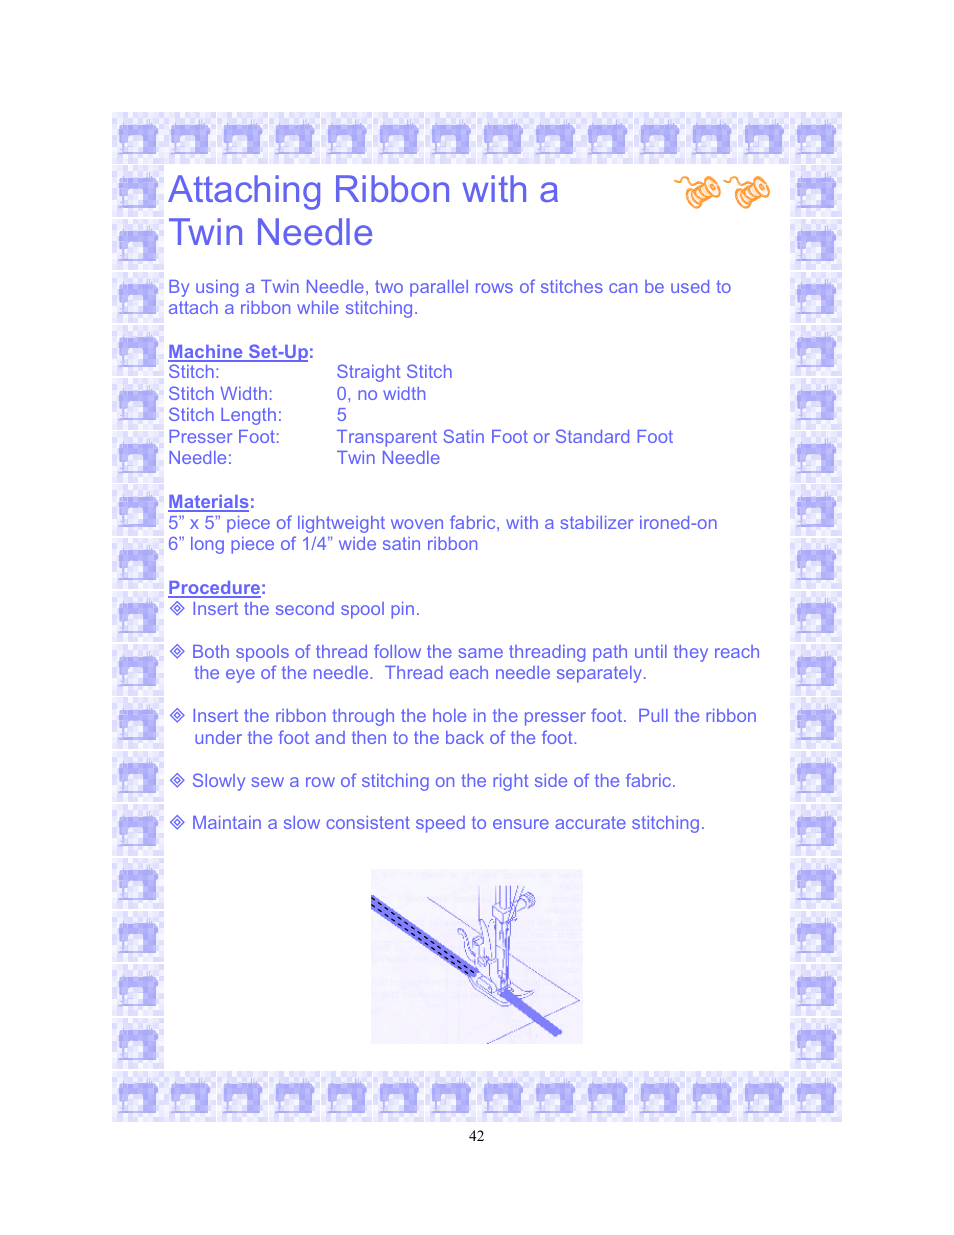 Attaching ribbon with a twin needle | SINGER 6550-WORKBOOK Scholastic User Manual | Page 46 / 59